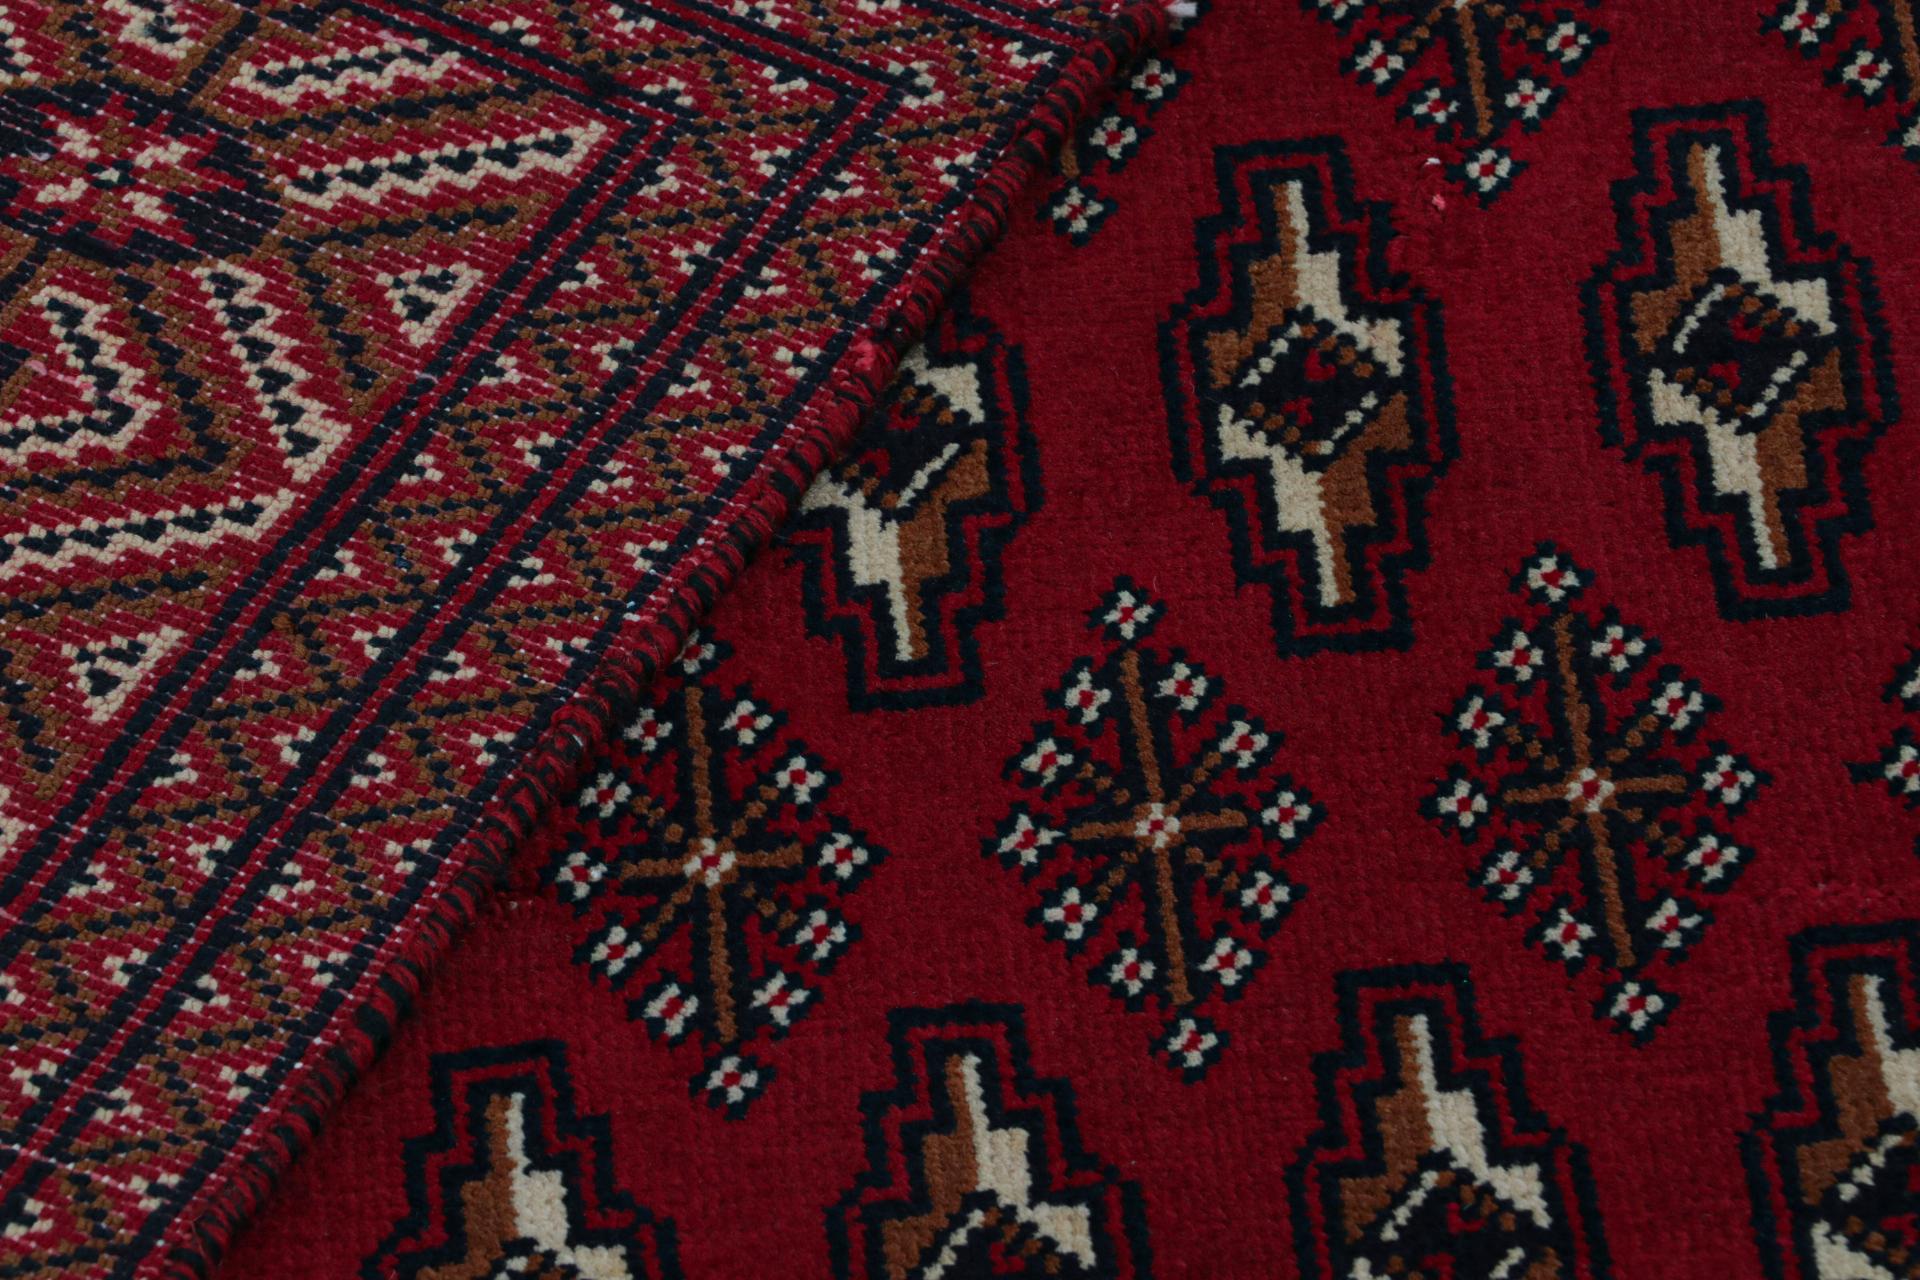 Vintage Persian rug in Red with Beige-Brown Geometric Patterns by Rug & Kilim For Sale 1